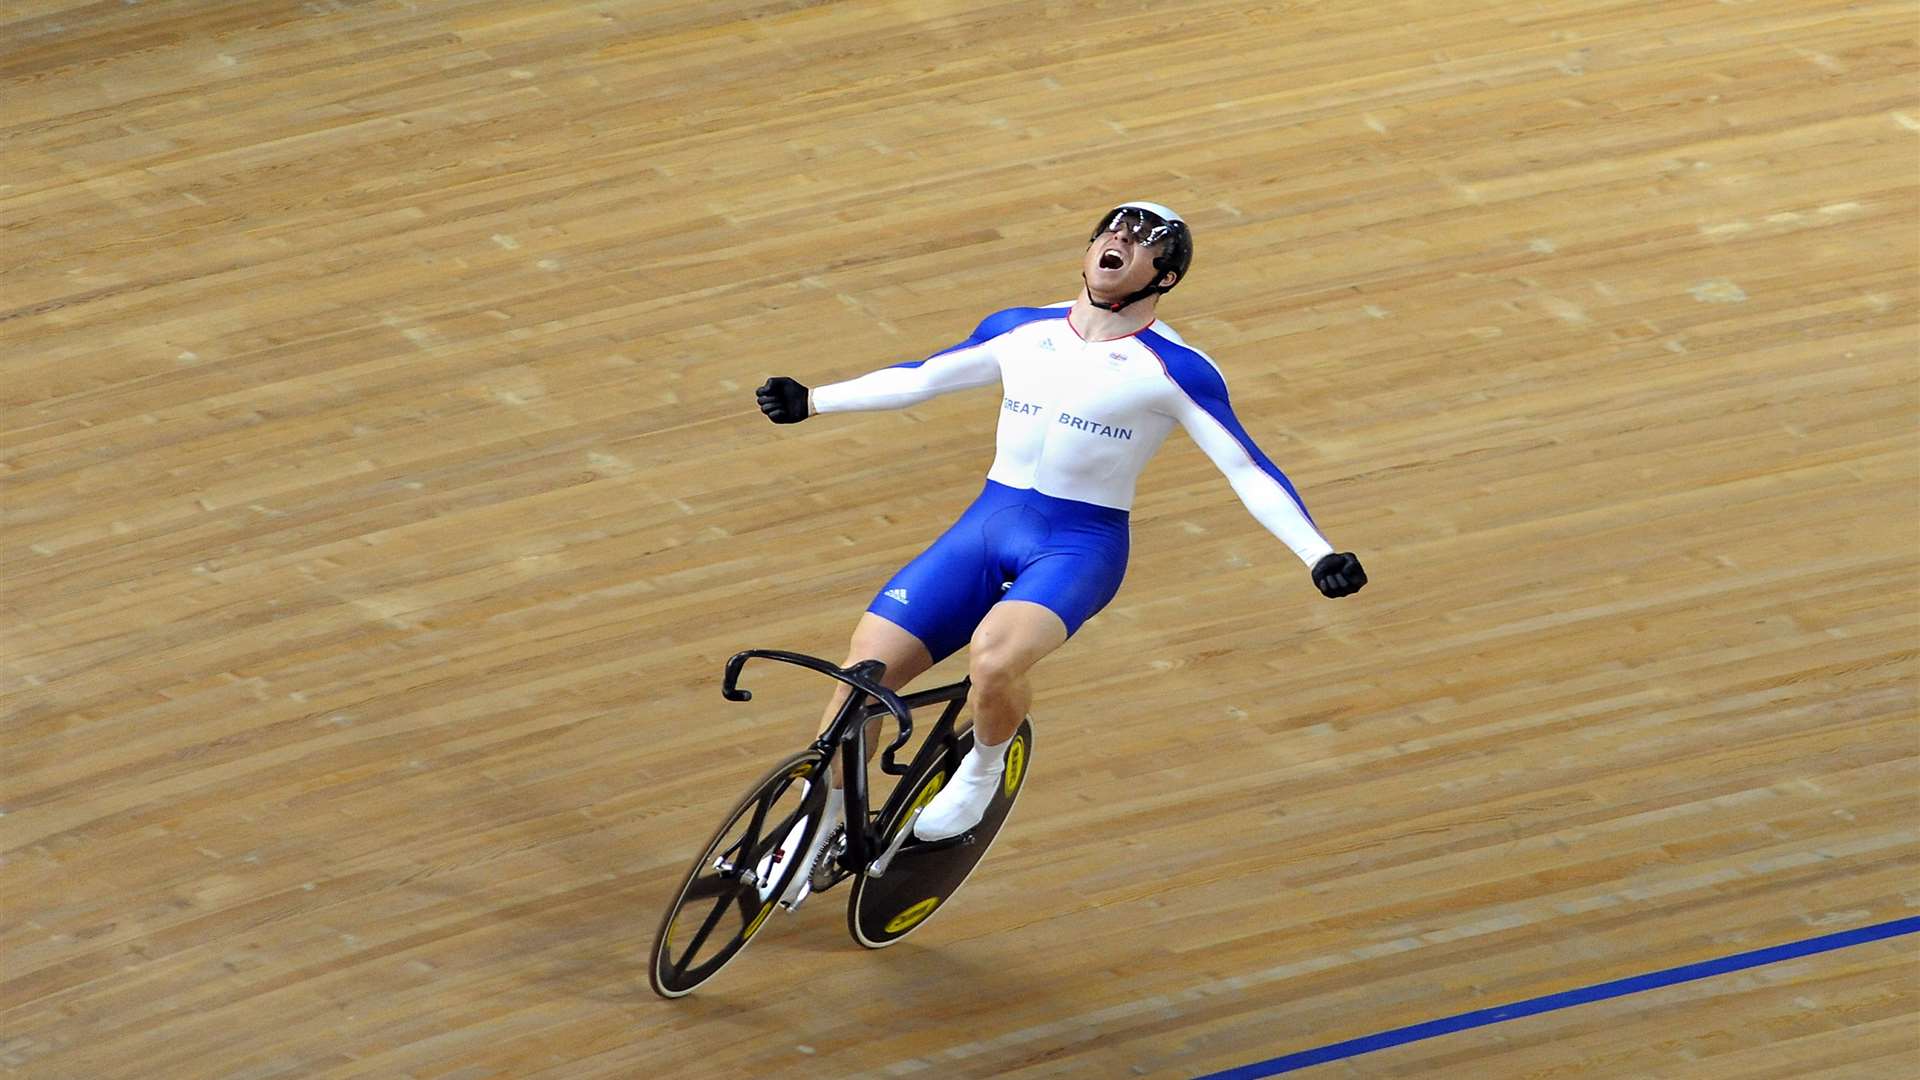 With his total of seven Olympic medals - six gold and one silver - Chris Hoy is the second most decorated Olympic cyclist of all time